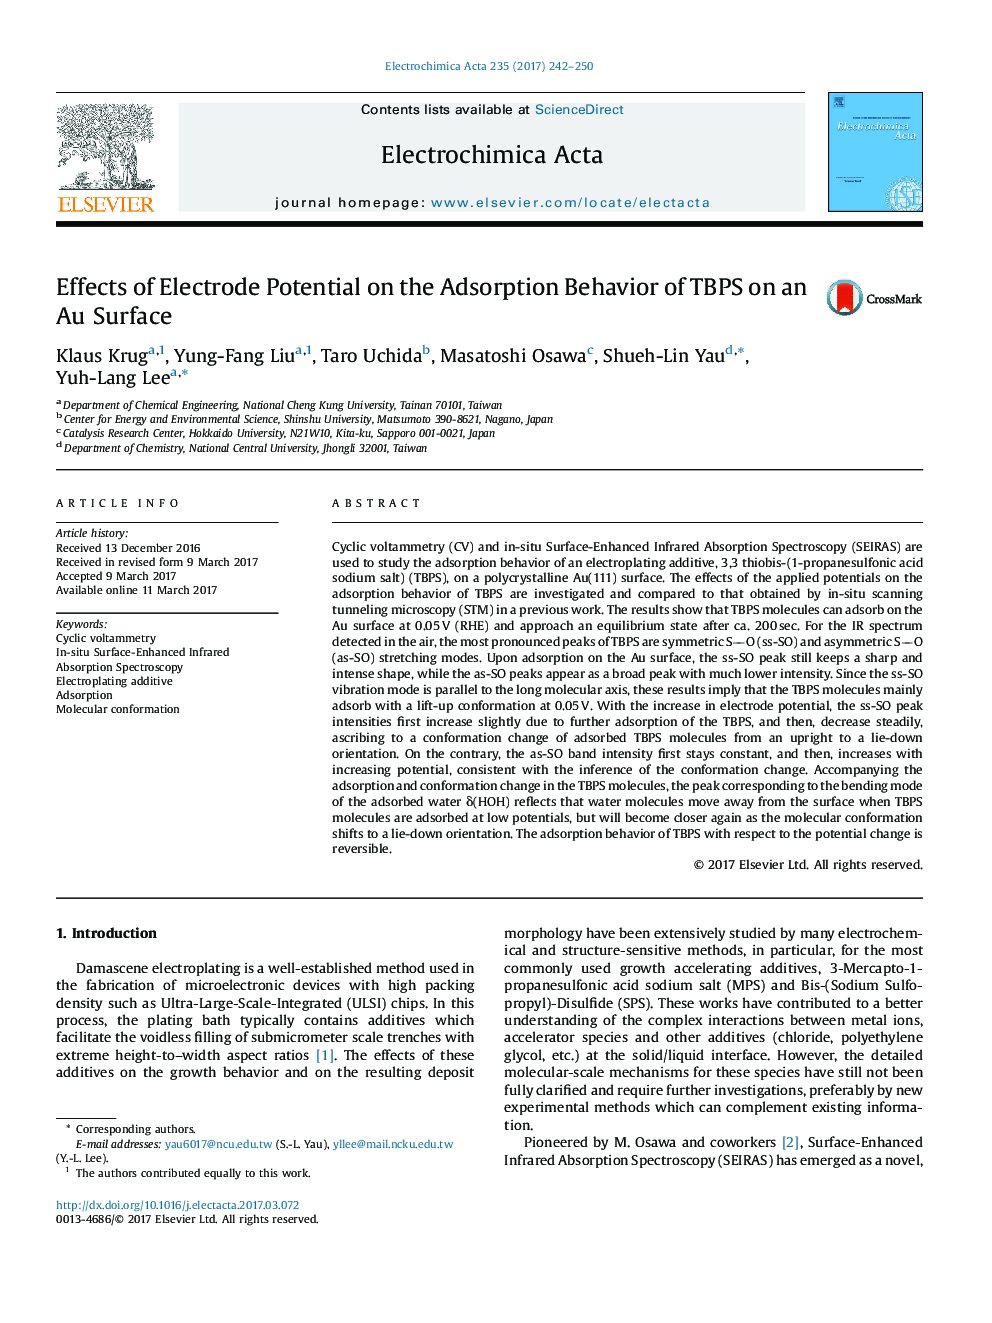 Effects of Electrode Potential on the Adsorption Behavior of TBPS on an Au Surface